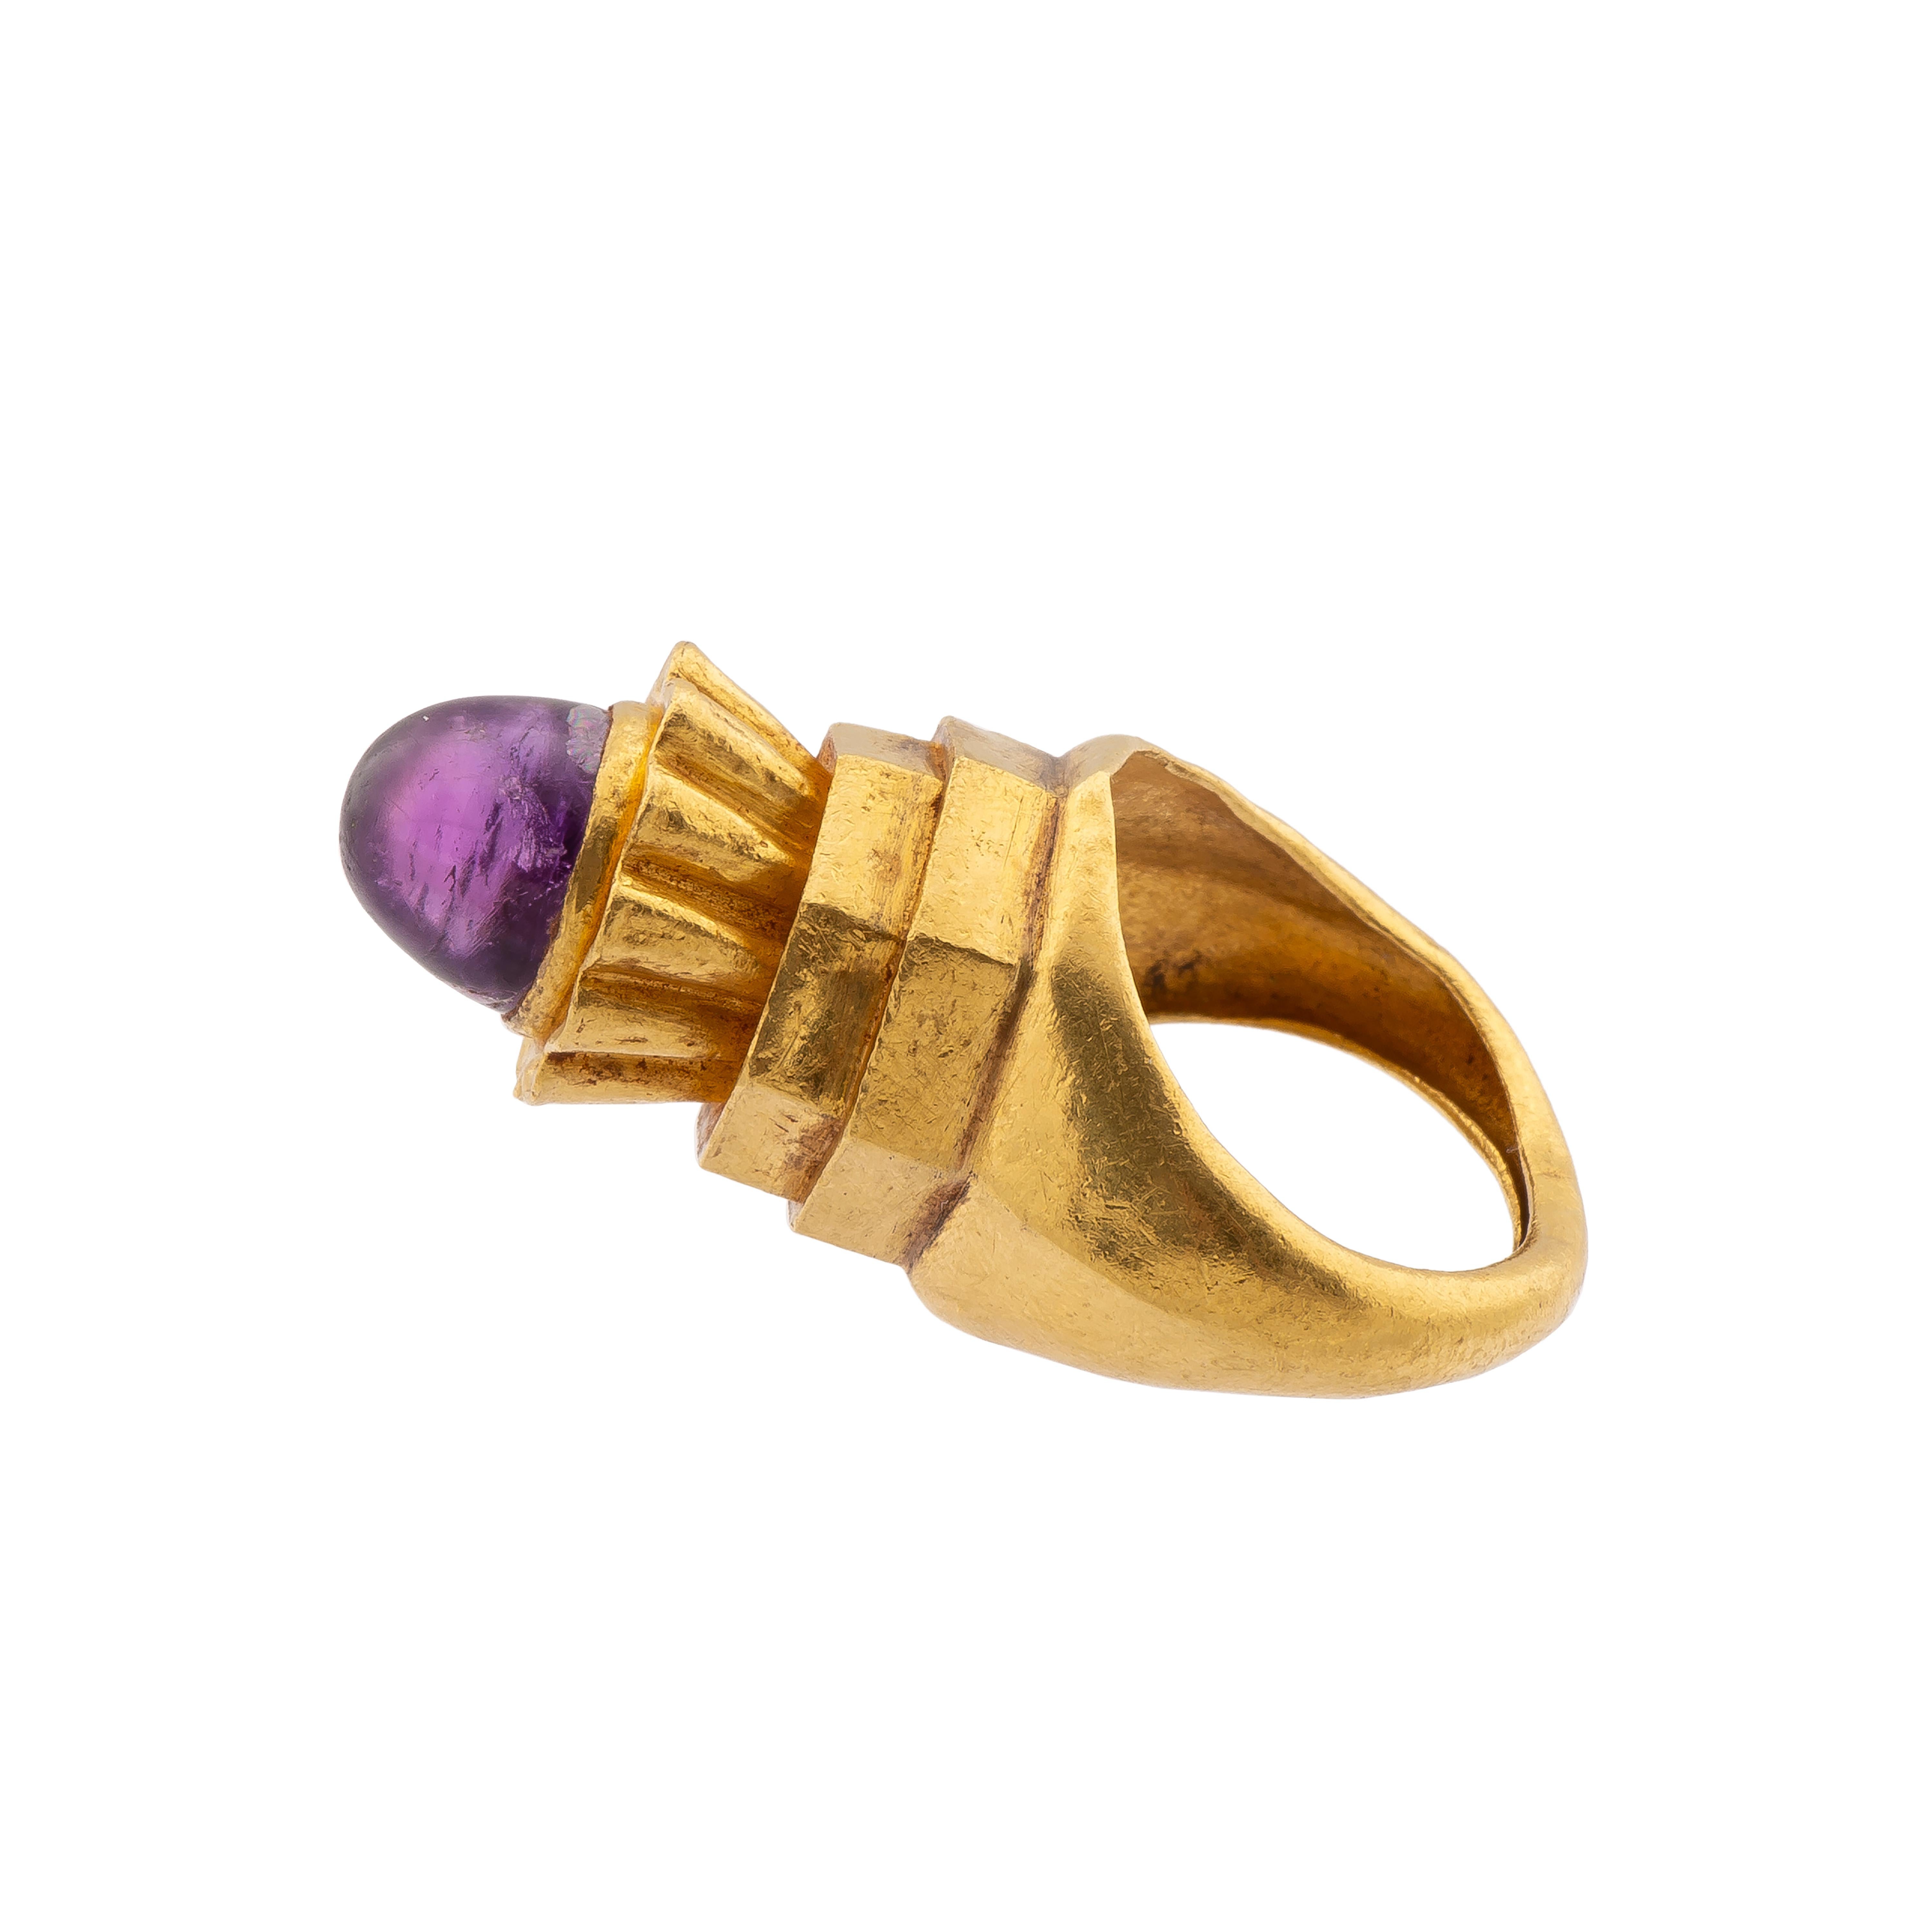 Byzantine Gemstone Ring Set with an Amethyst  
Byzantium, c. 500 AD  
Weight 13.0 gr.; bezel 15.8 x 17.5 x 21.8 mm.; circumference 55.76 mm.; US size 7.5; UK size P  

Bold heavy ring with a deep violet amethyst – uncut but polished – set in a